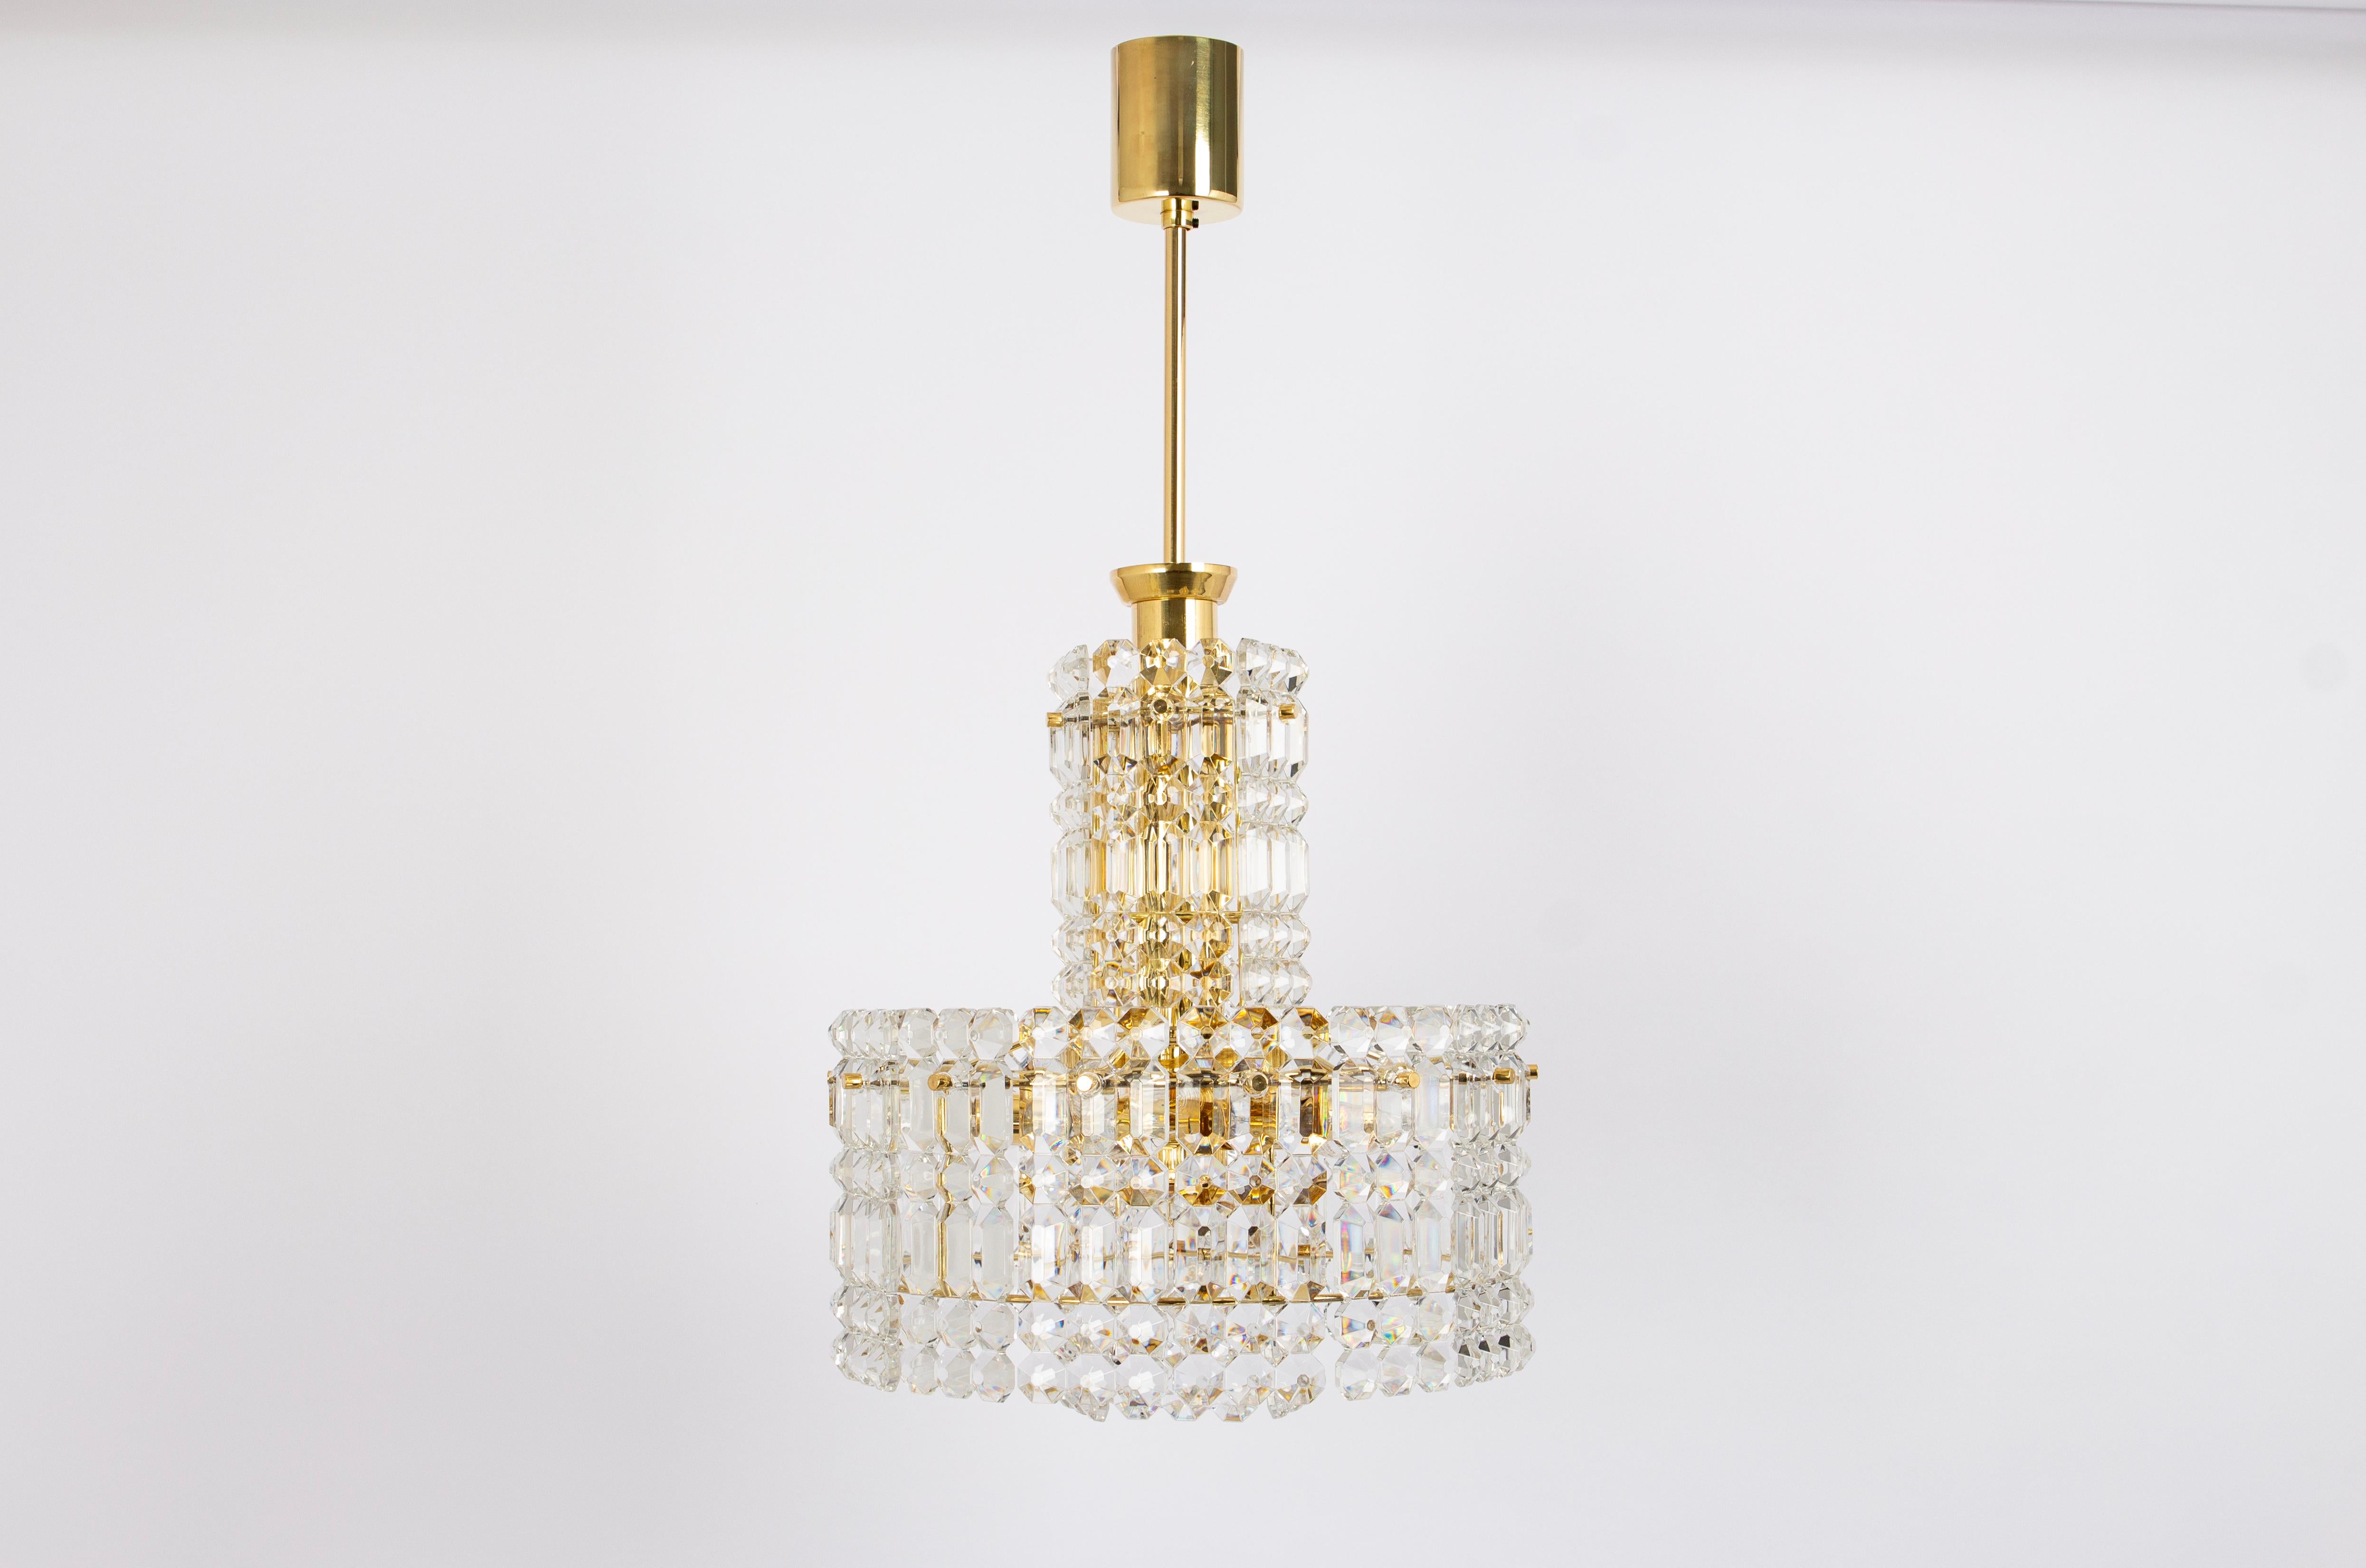 A stunning chandelier by Kinkeldey, Germany, manufactured circa 1970-1979. A handmade and high-quality piece. The ceiling fixture and the frame are made of brass and have 3 rings with lots of facetted crystal glass elements.

High quality and in